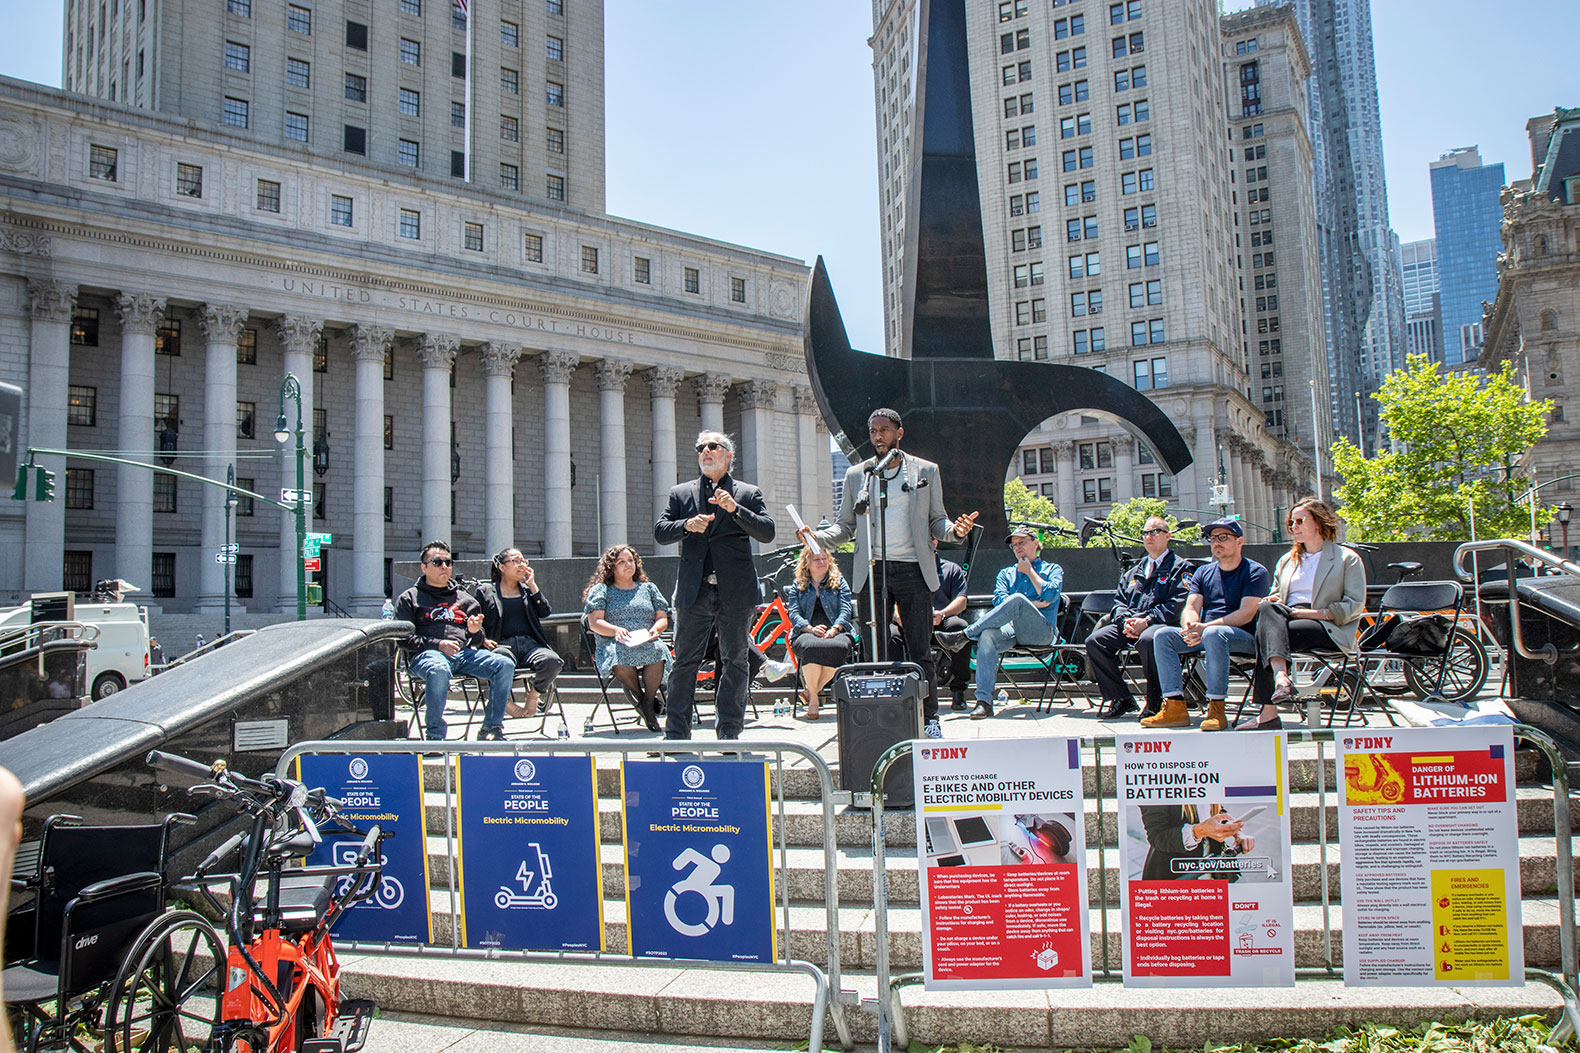 The Public Advocate speaks at Foley Square as Micro Mobility advocates listen behind him. Signs for safety measures and different devices are placed at the front.